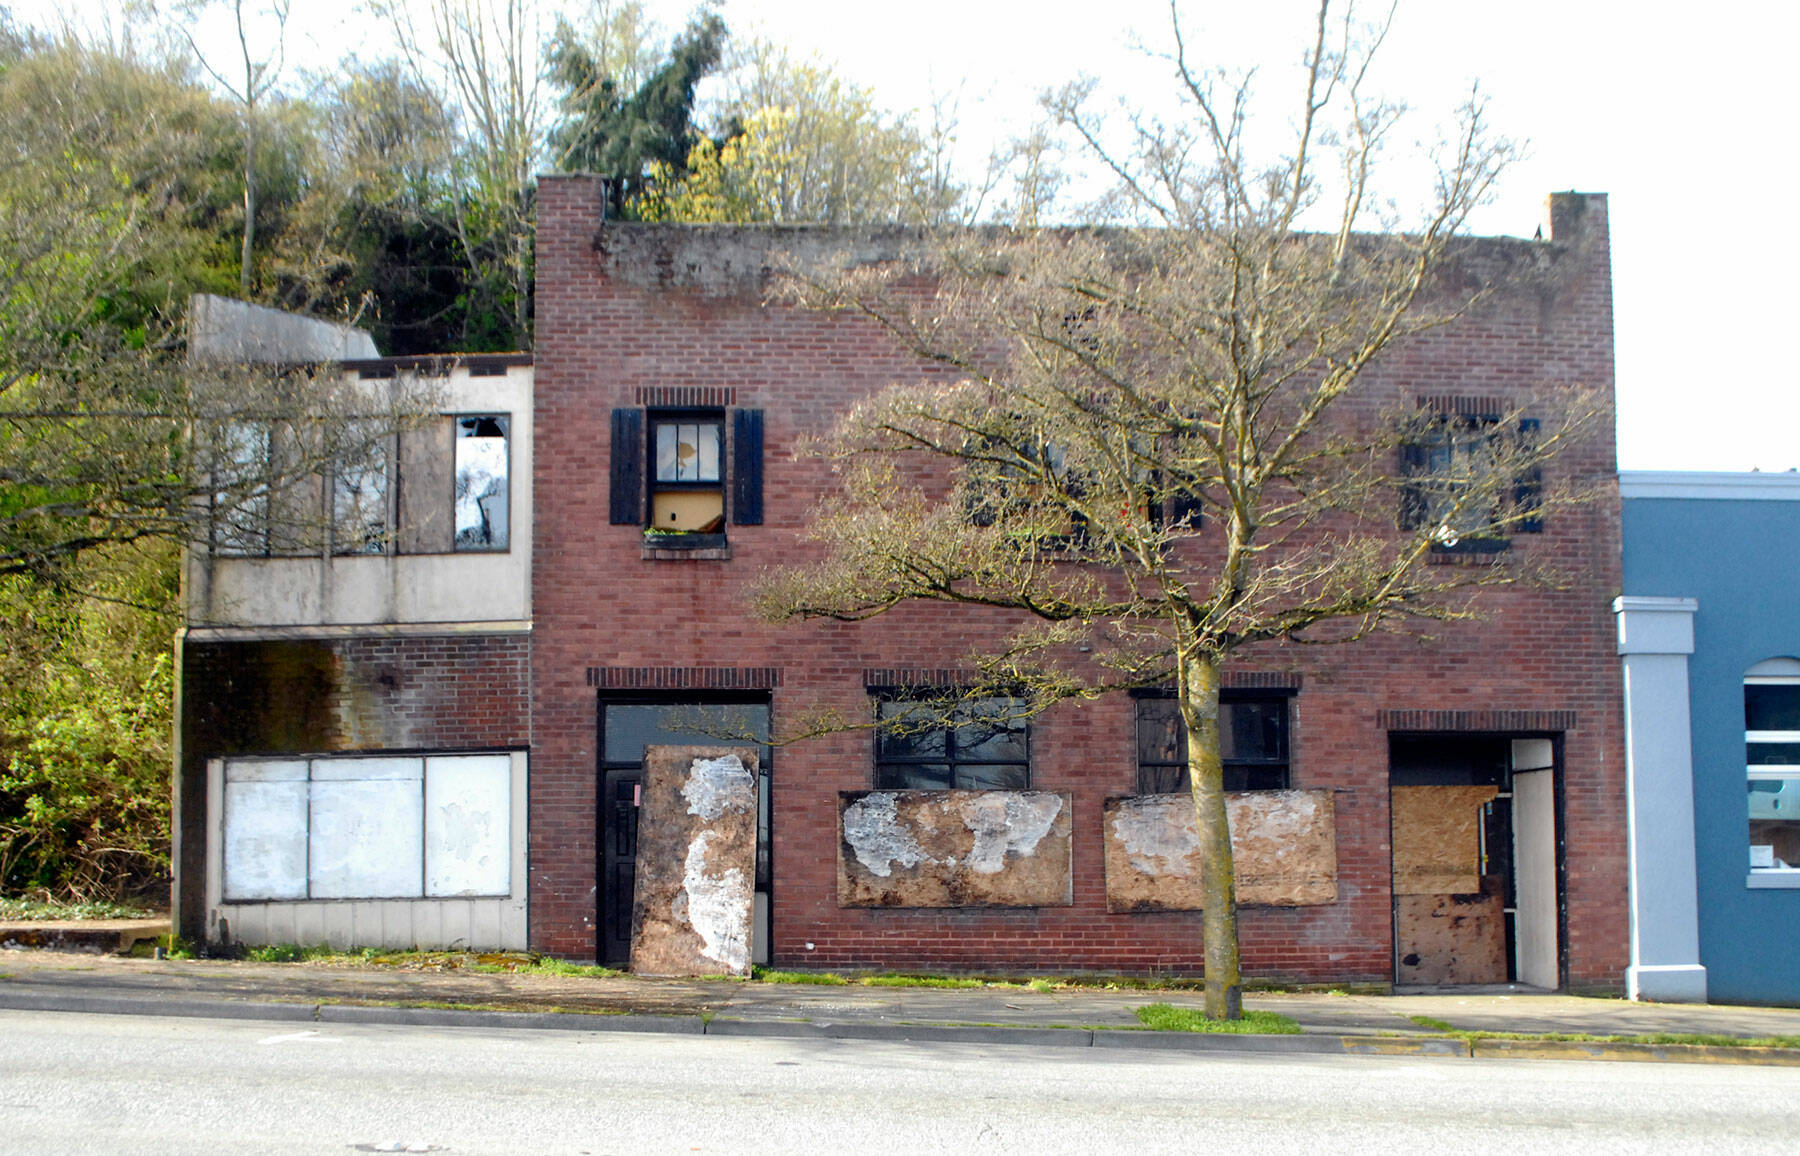 A long-vacant building at 204 E. Front St. in downtown Port Angeles has been condemned by the city council. (Keith Thorpe/Peninsula Daily News)